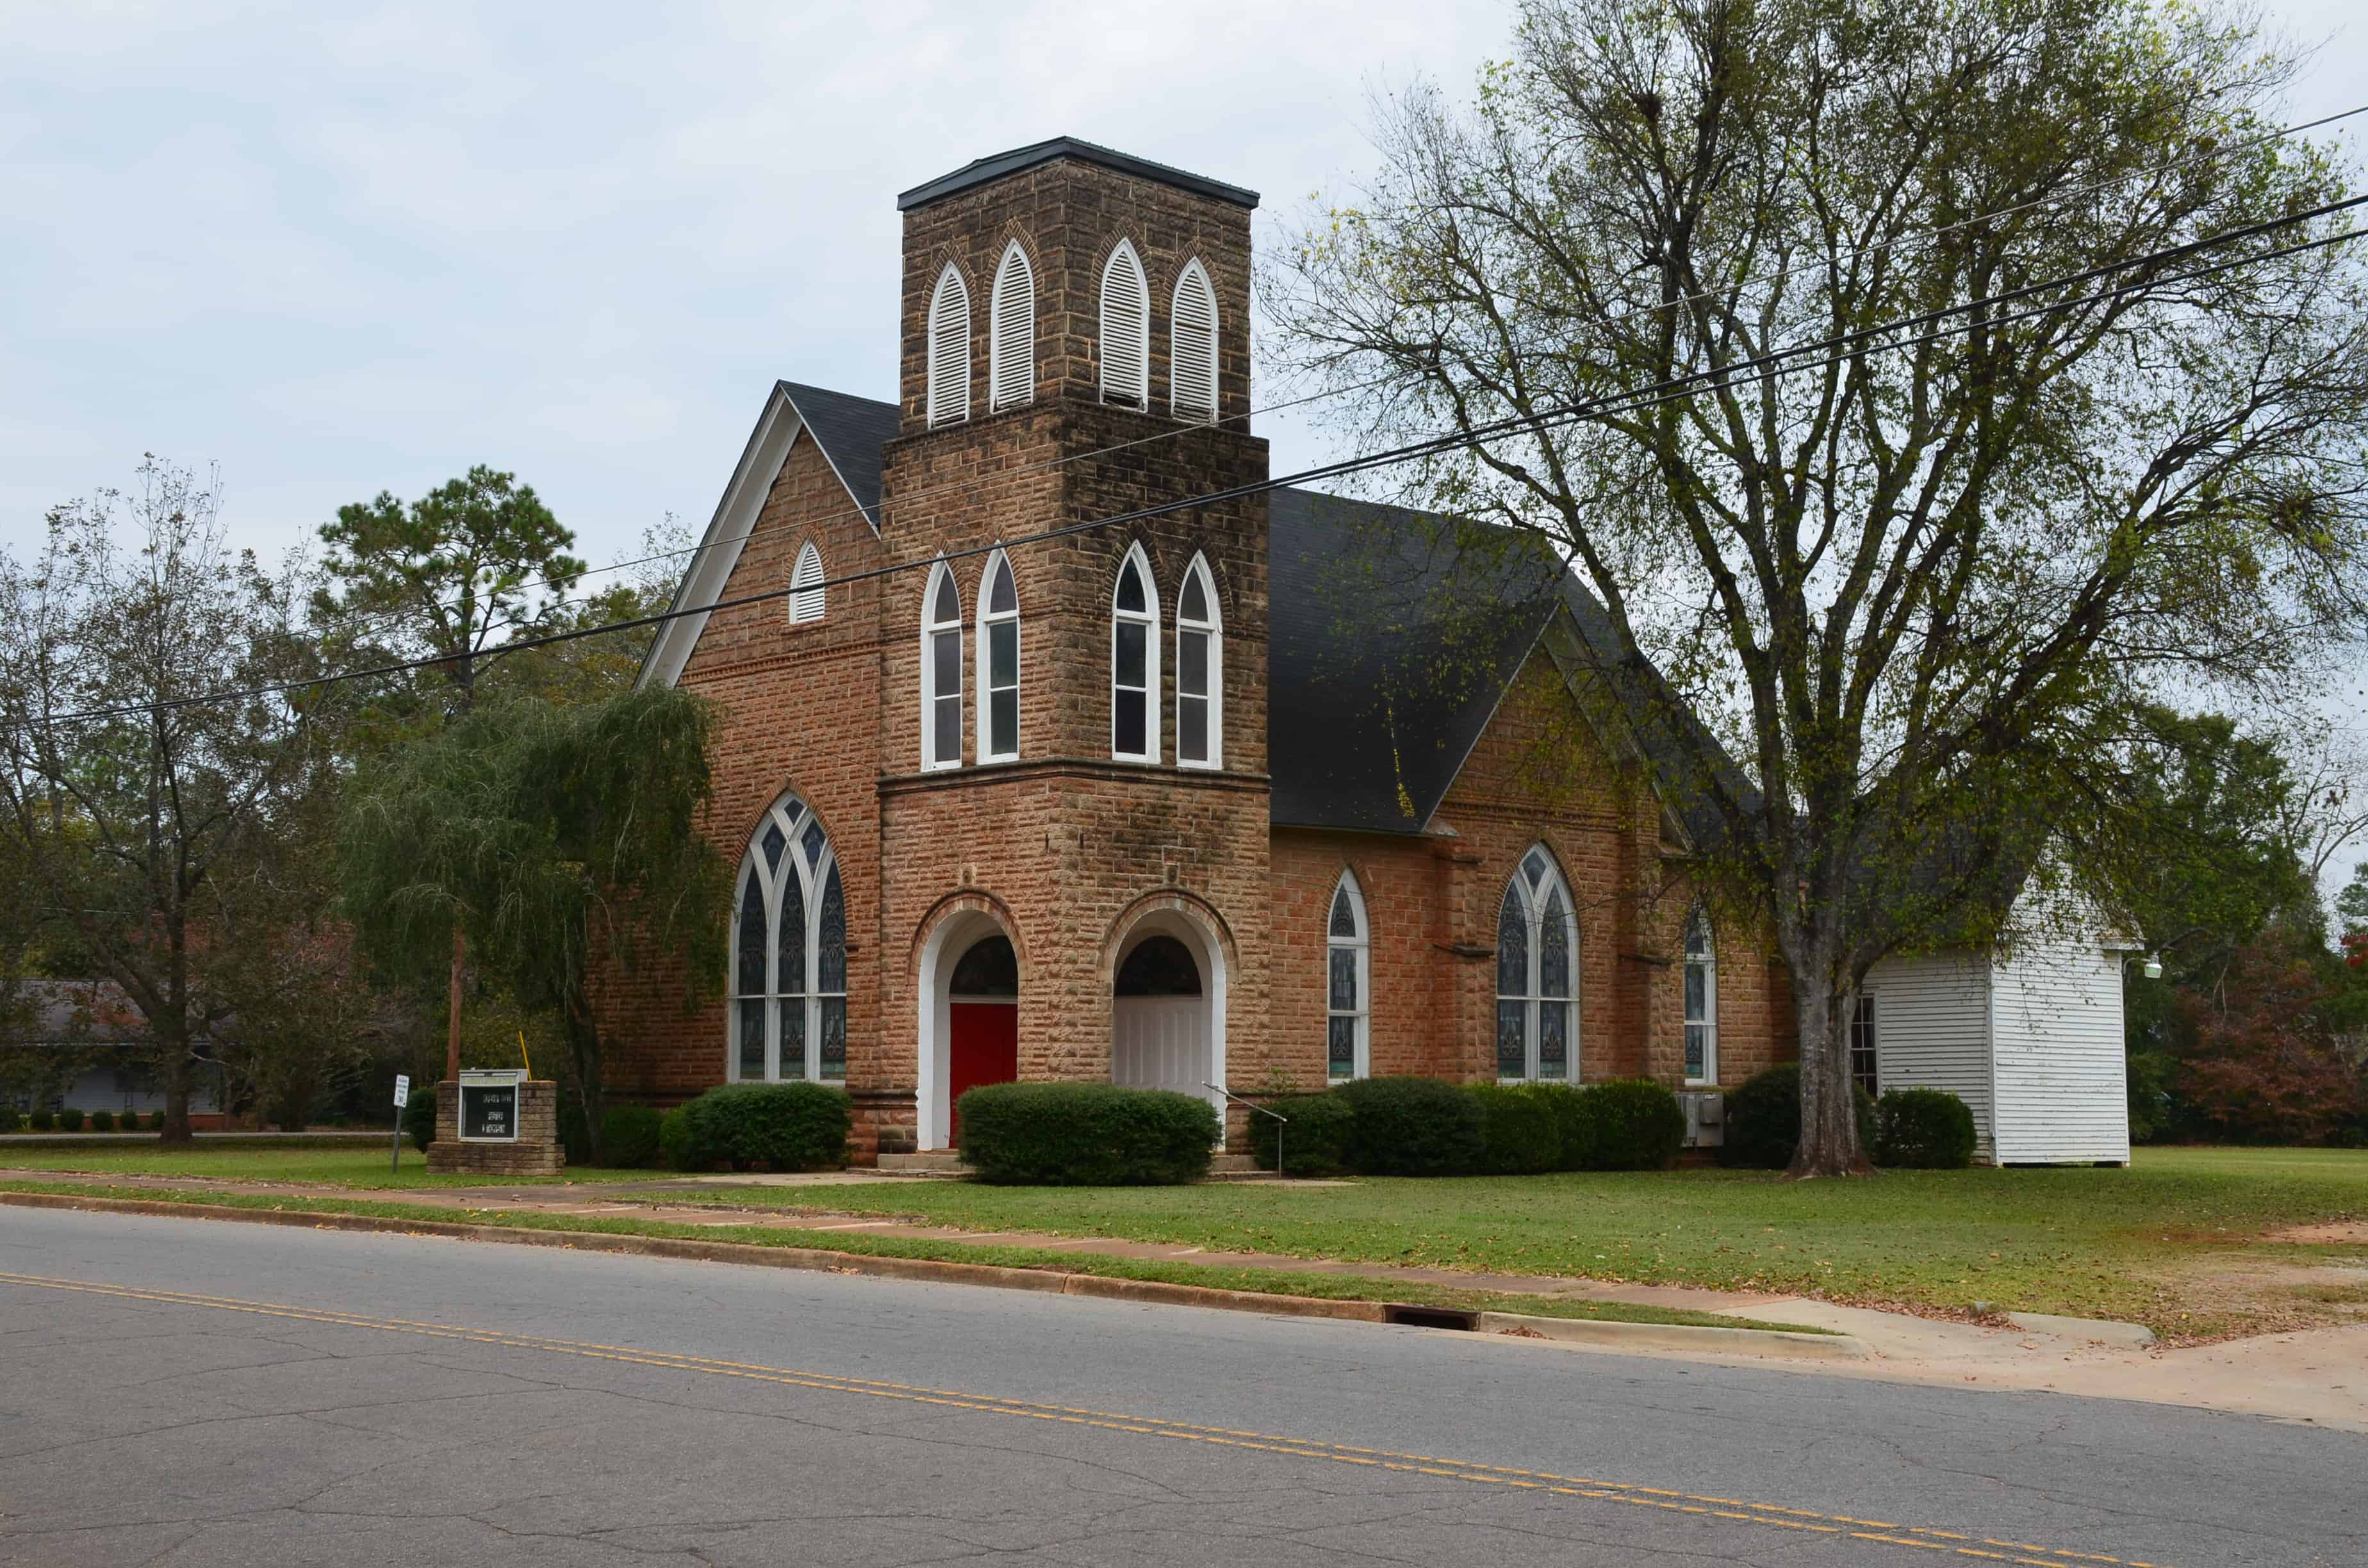 St. Andrew's Lutheran Church in Plains, Georgia